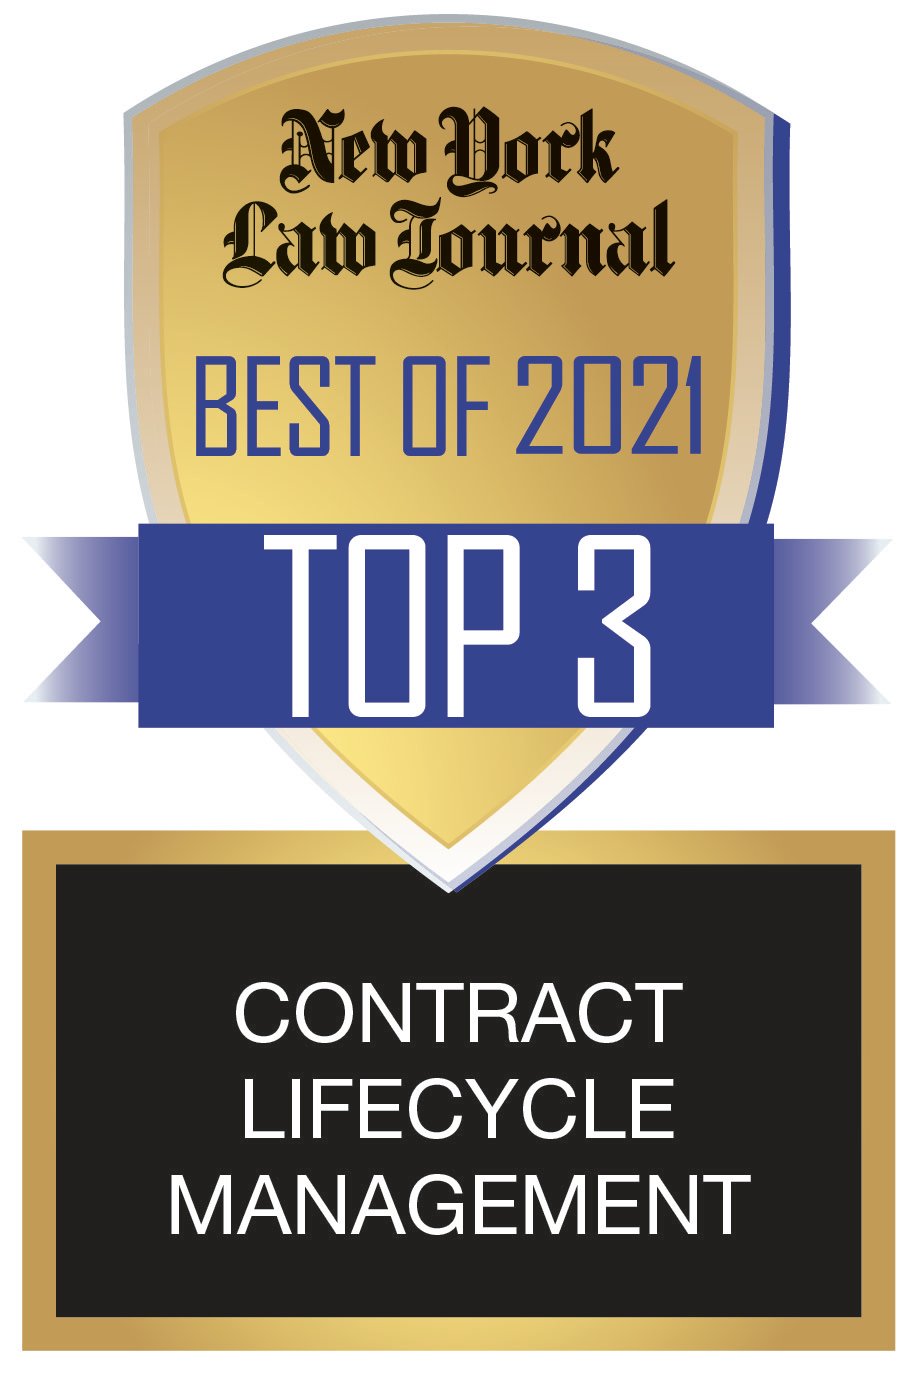 NYLJ08232021501576Knowable_Contract Lifecycle Management_TOP3 (1)